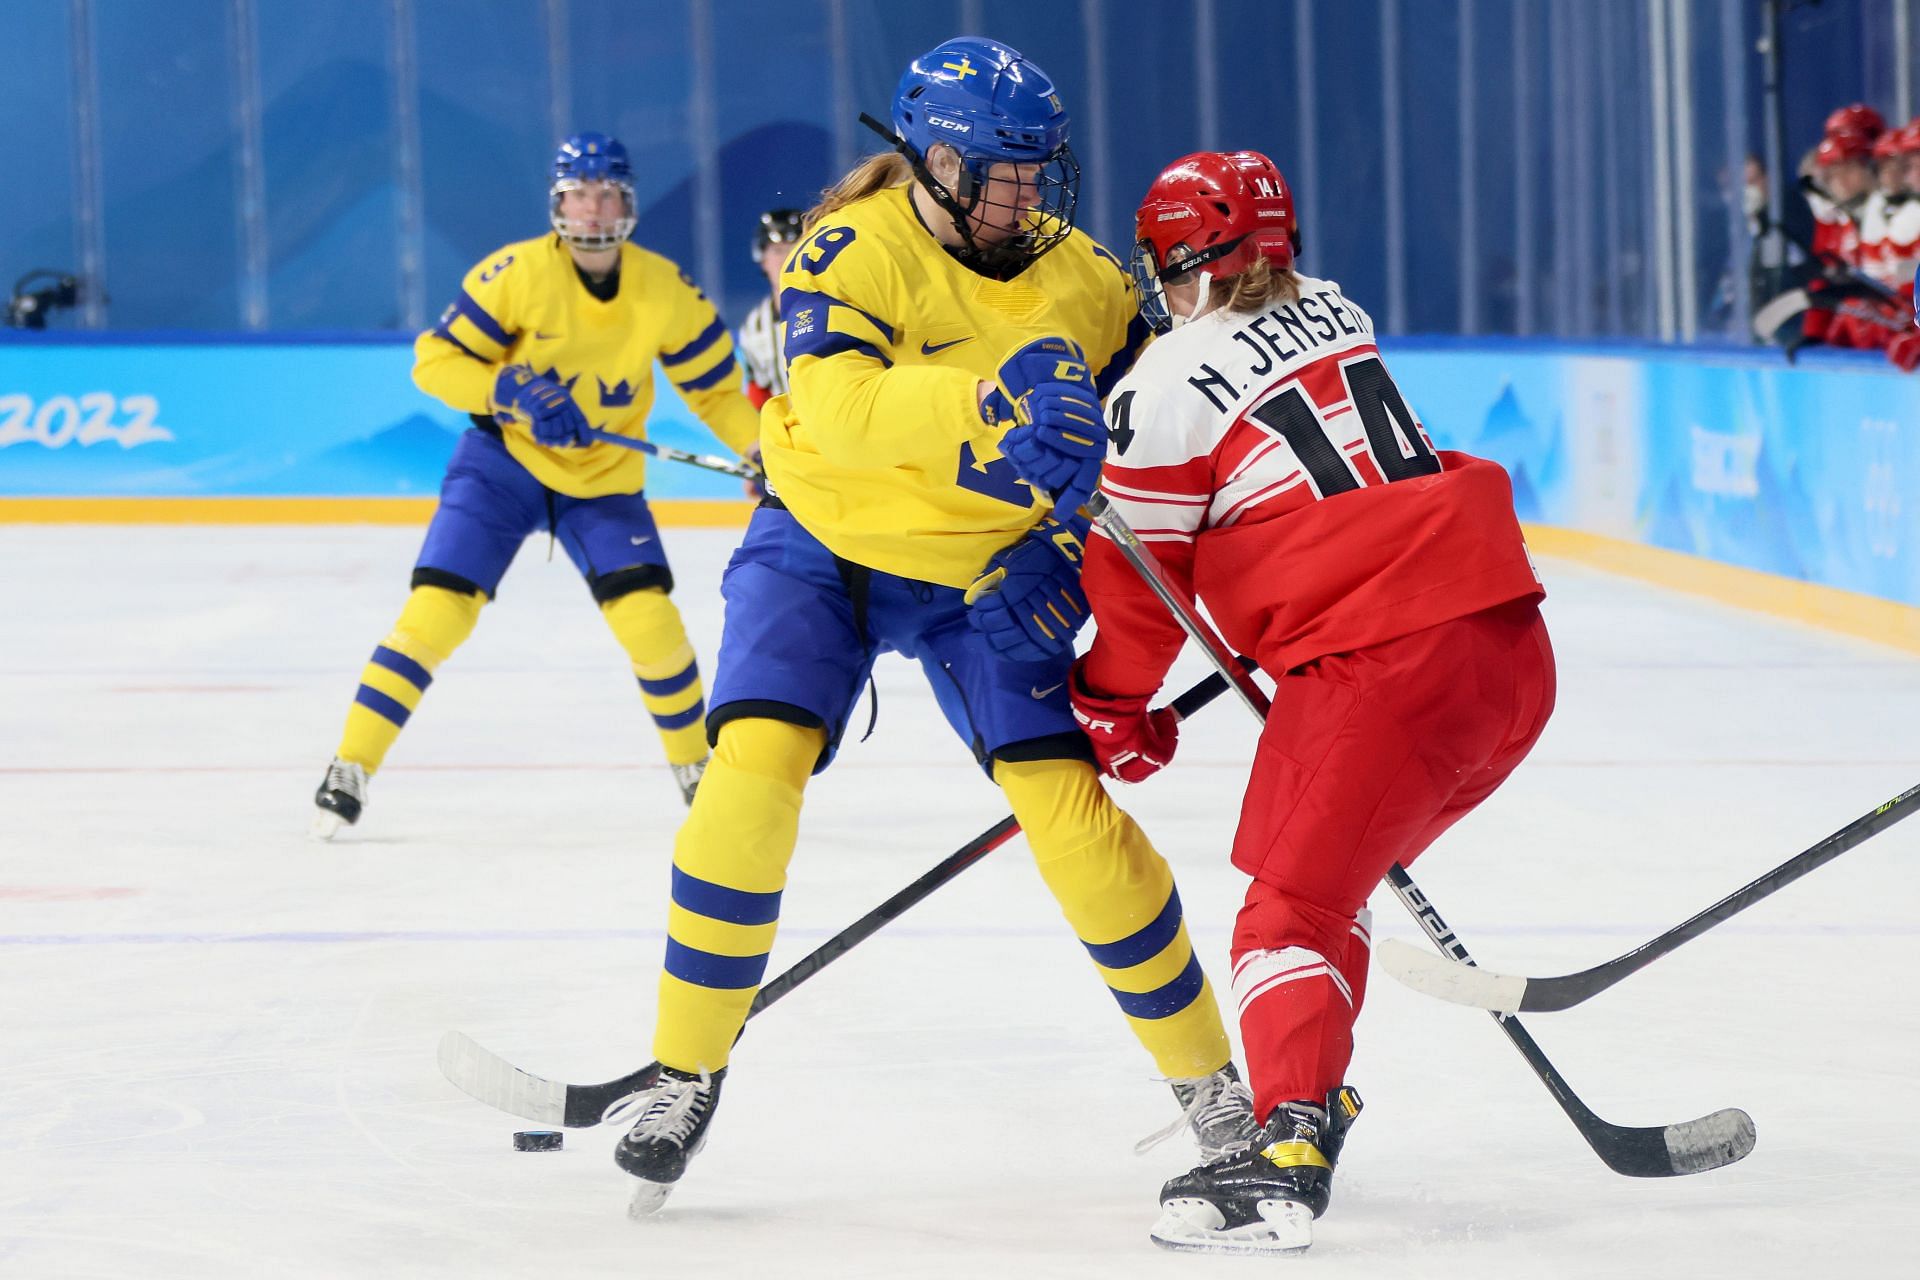 Sweden vs Denmark Group A How to watch, live streaming, channel list, and more